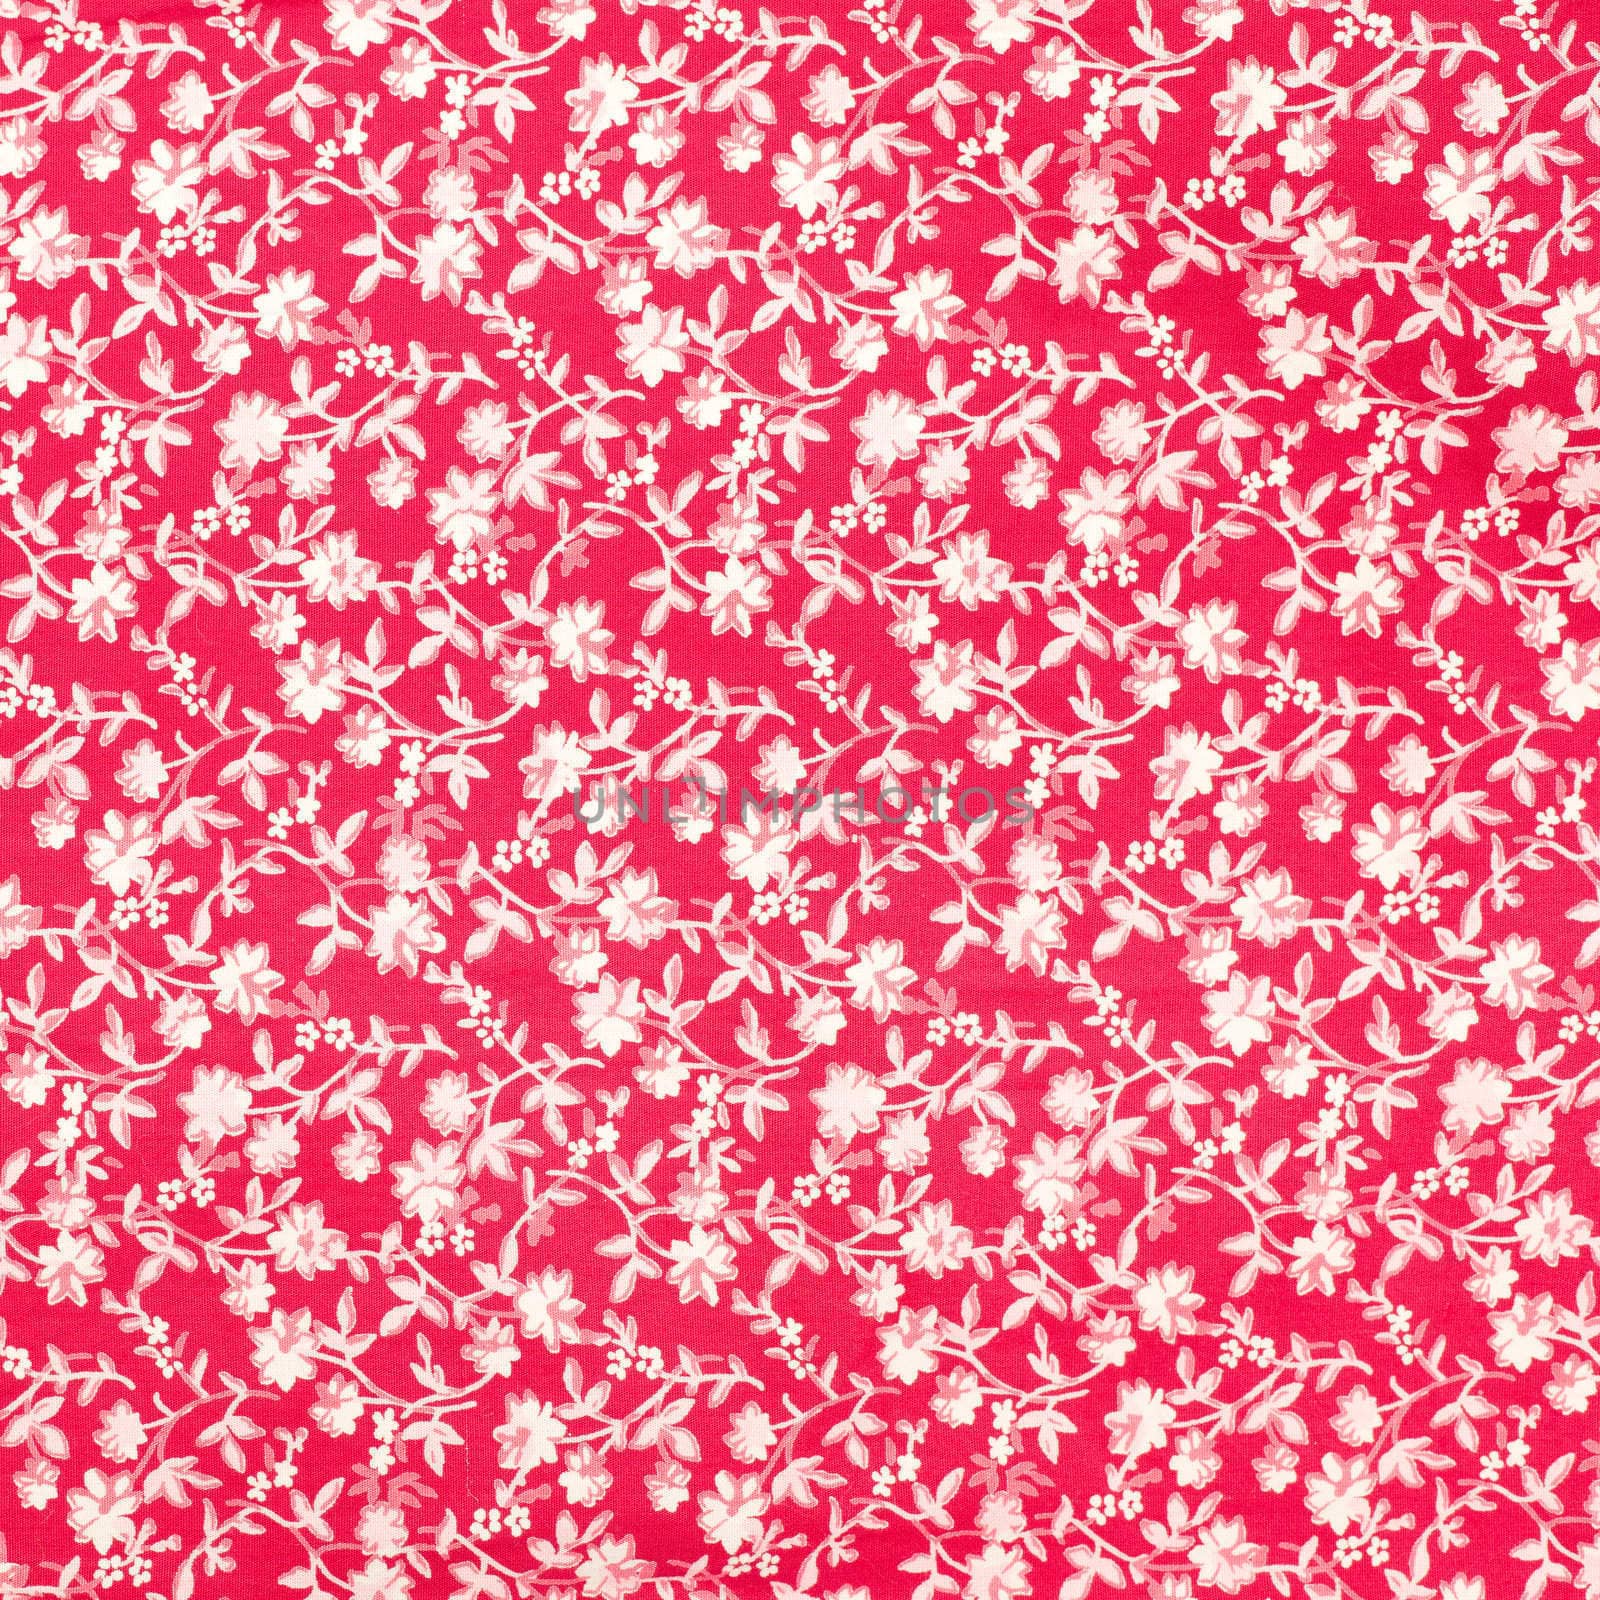 Inrticate floral pattern on red fabric as a a background